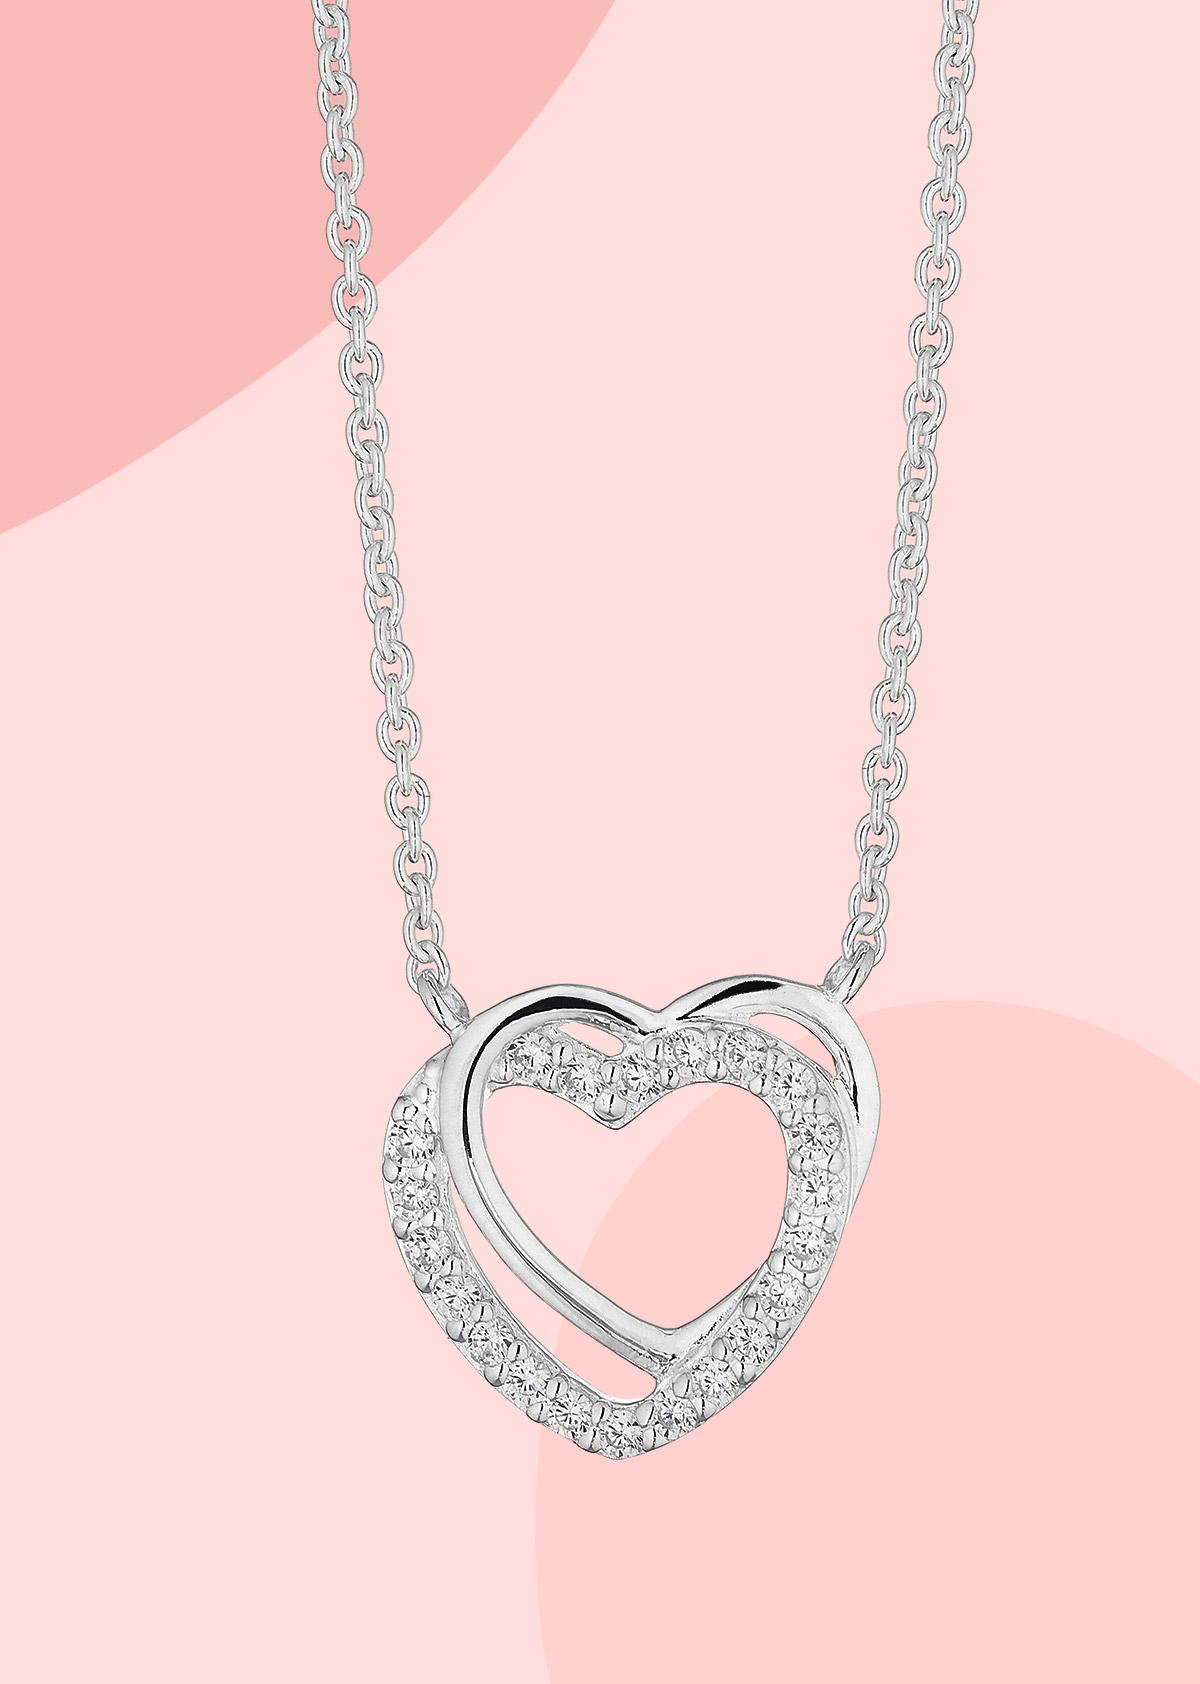 silver and diamond heart necklace